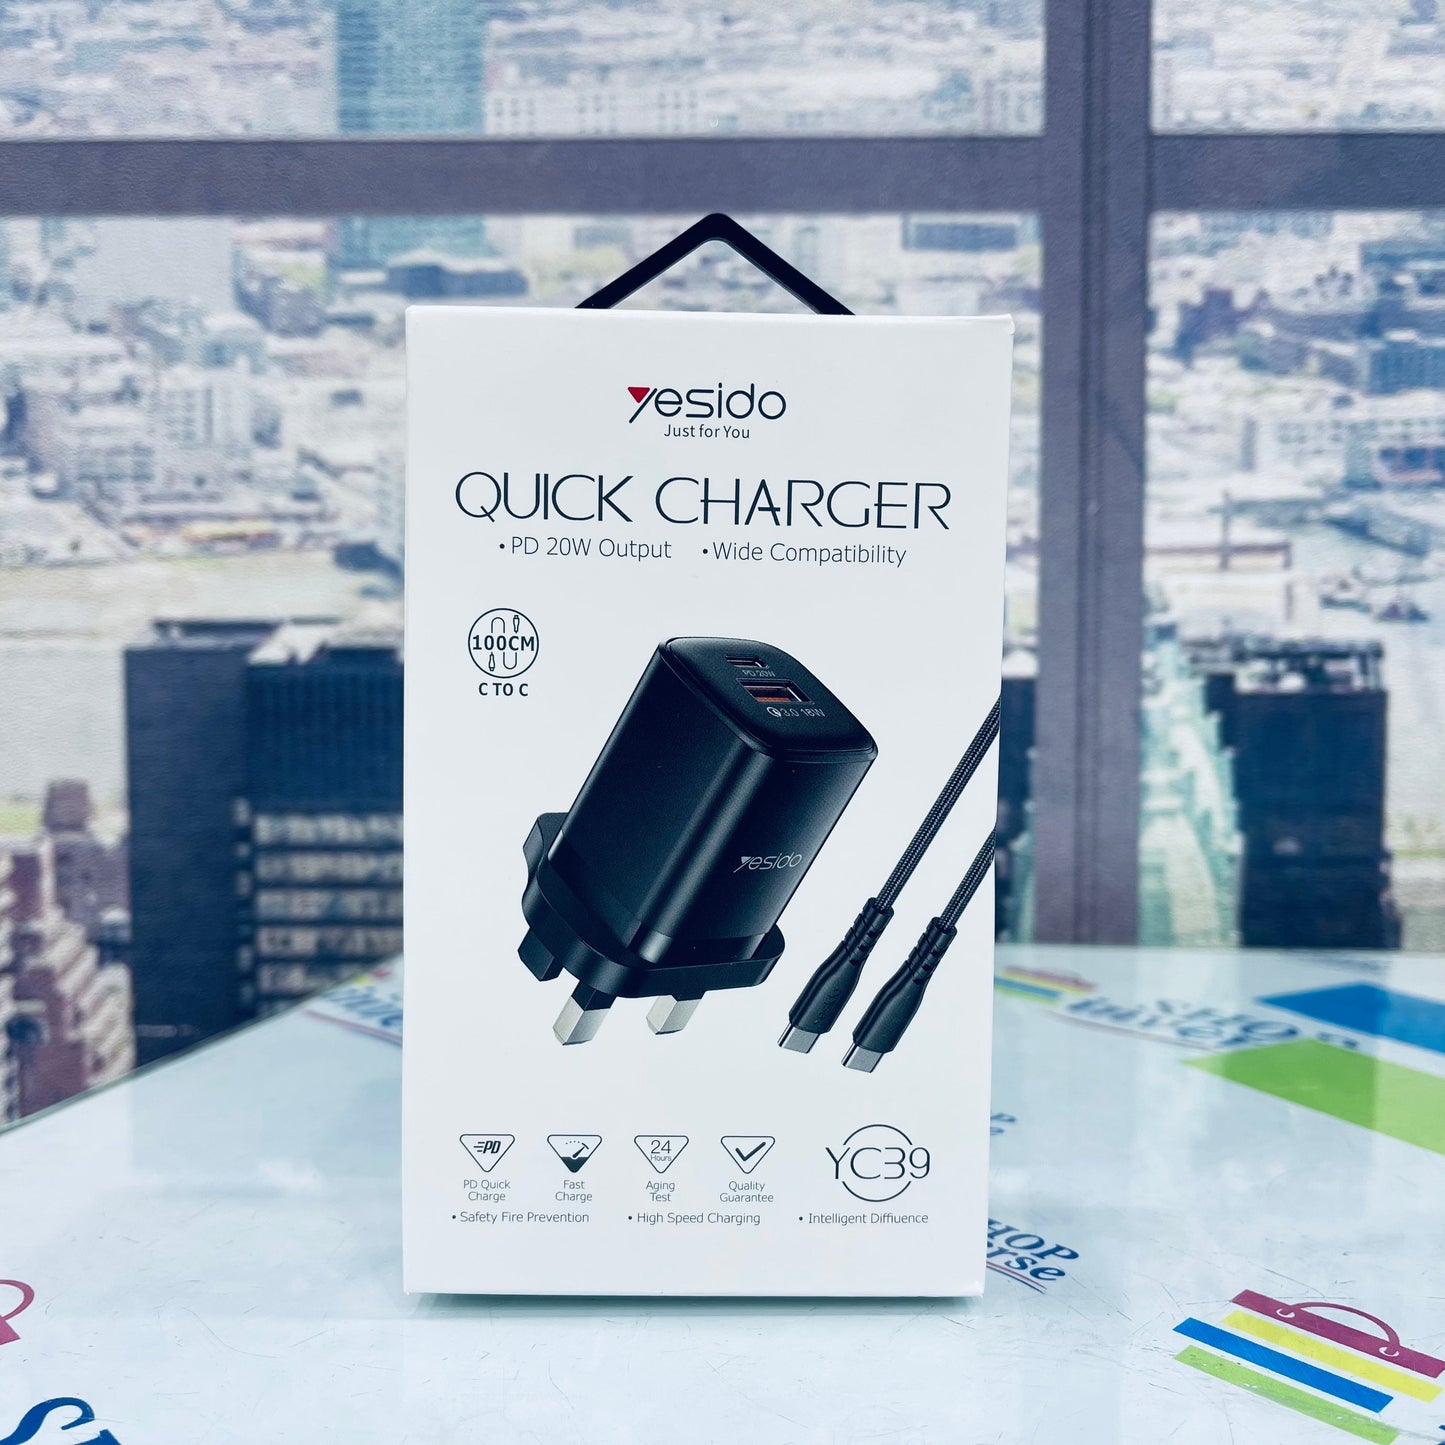 Yesido YC39 20W Quick Charger SHOPINVERSE